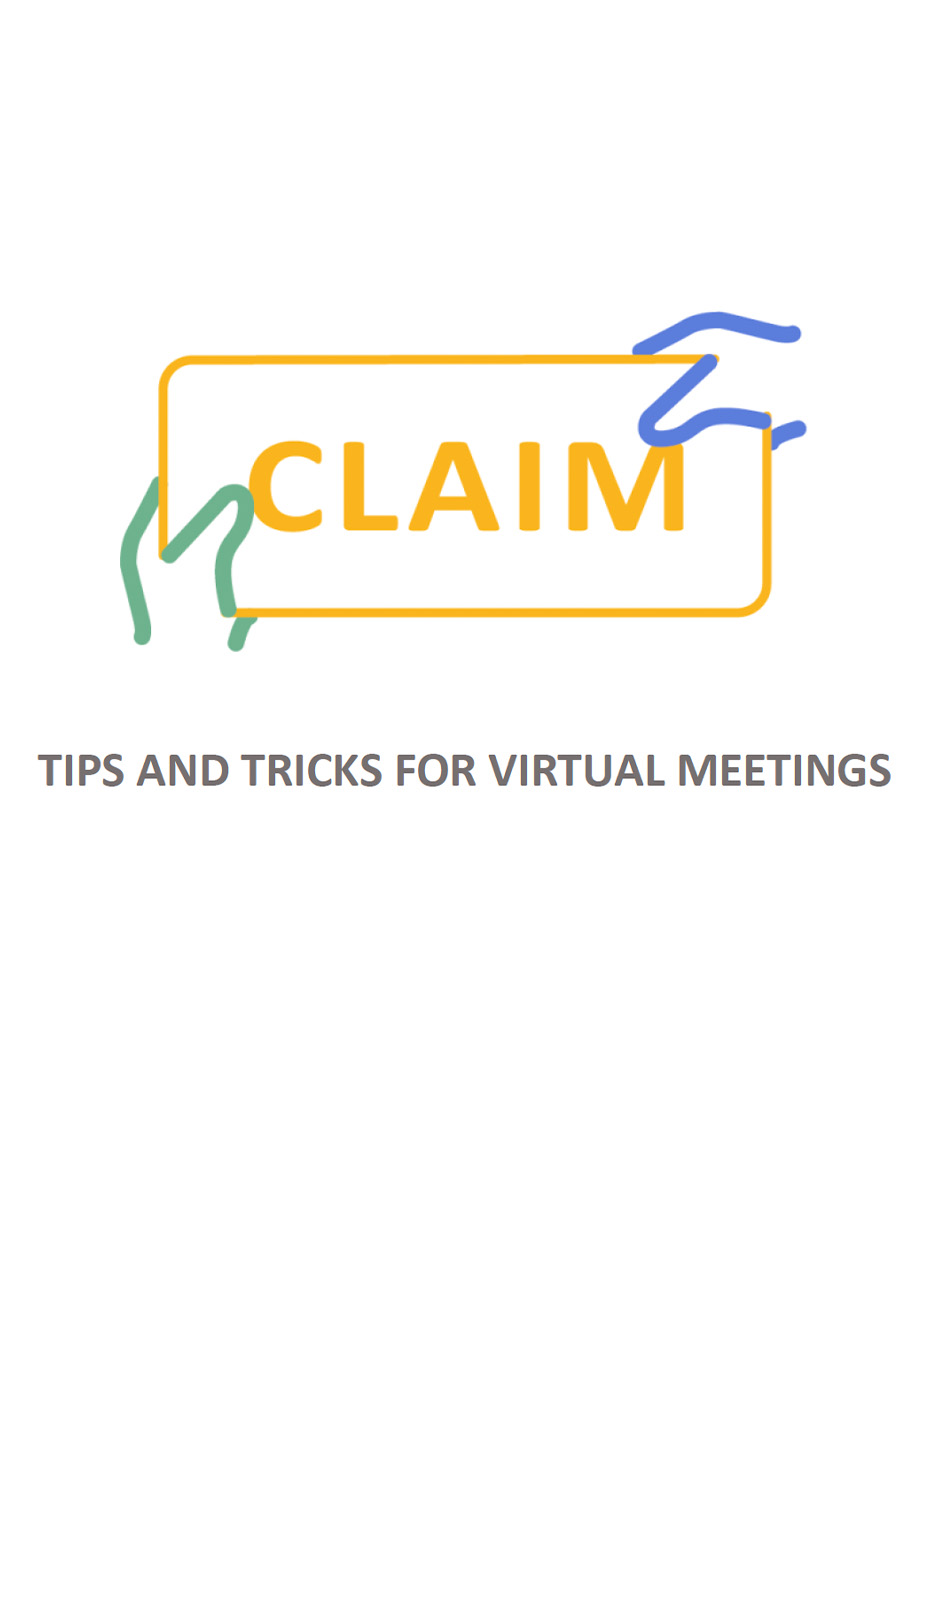 Tips and tricks for virtual meetings